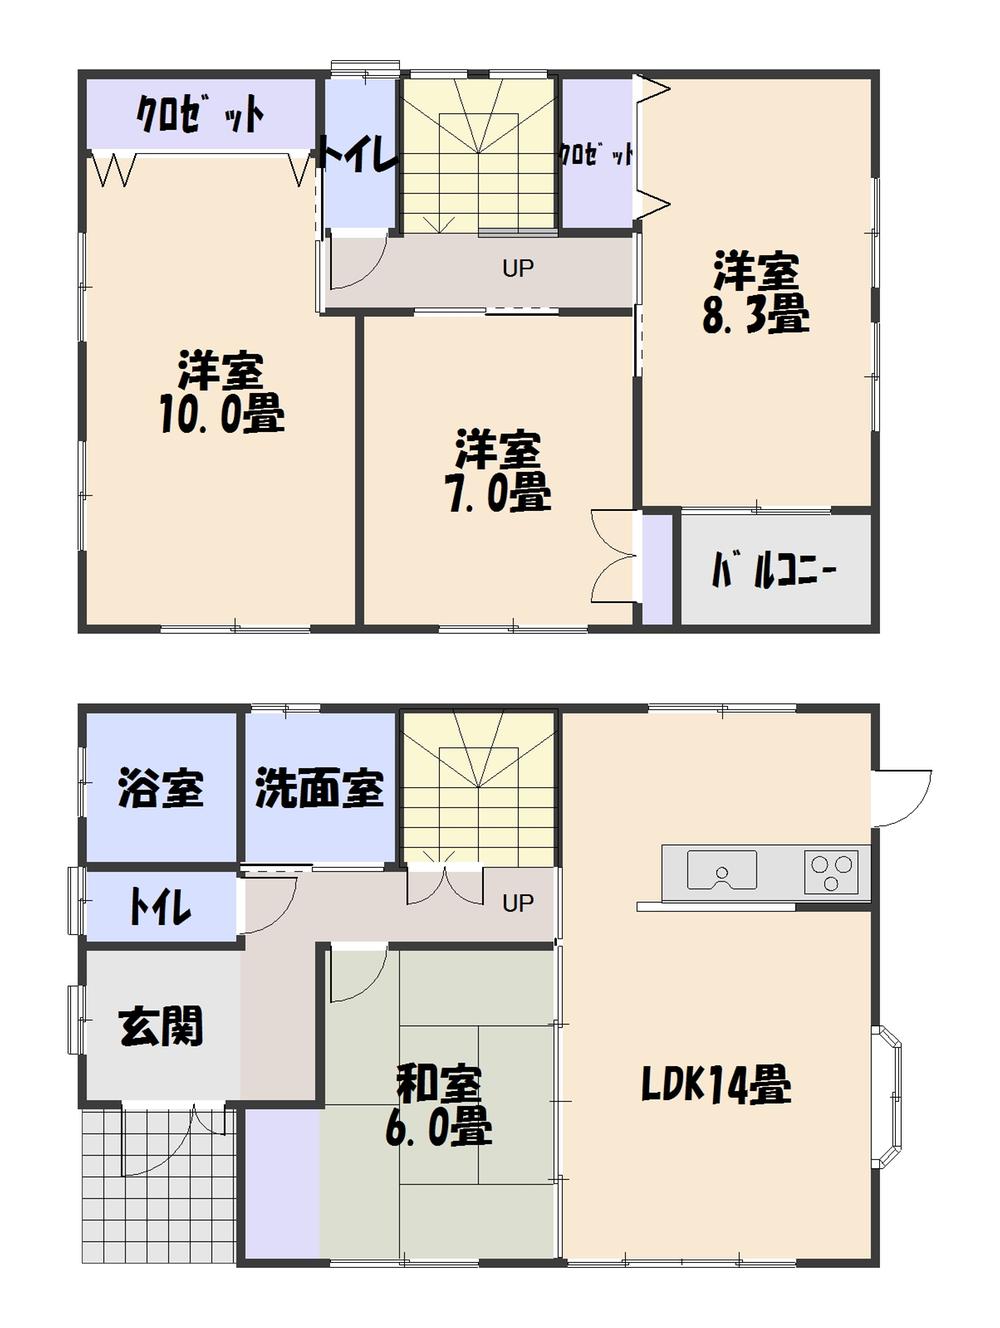 Floor plan. 16.5 million yen, 4LDK, Land area 199.49 sq m , Building area 109.51 sq m floor plan on the first floor was renovated Japanese-style Western-style. In addition to the closet and part of the floor, Housing was replaced under the floor. 